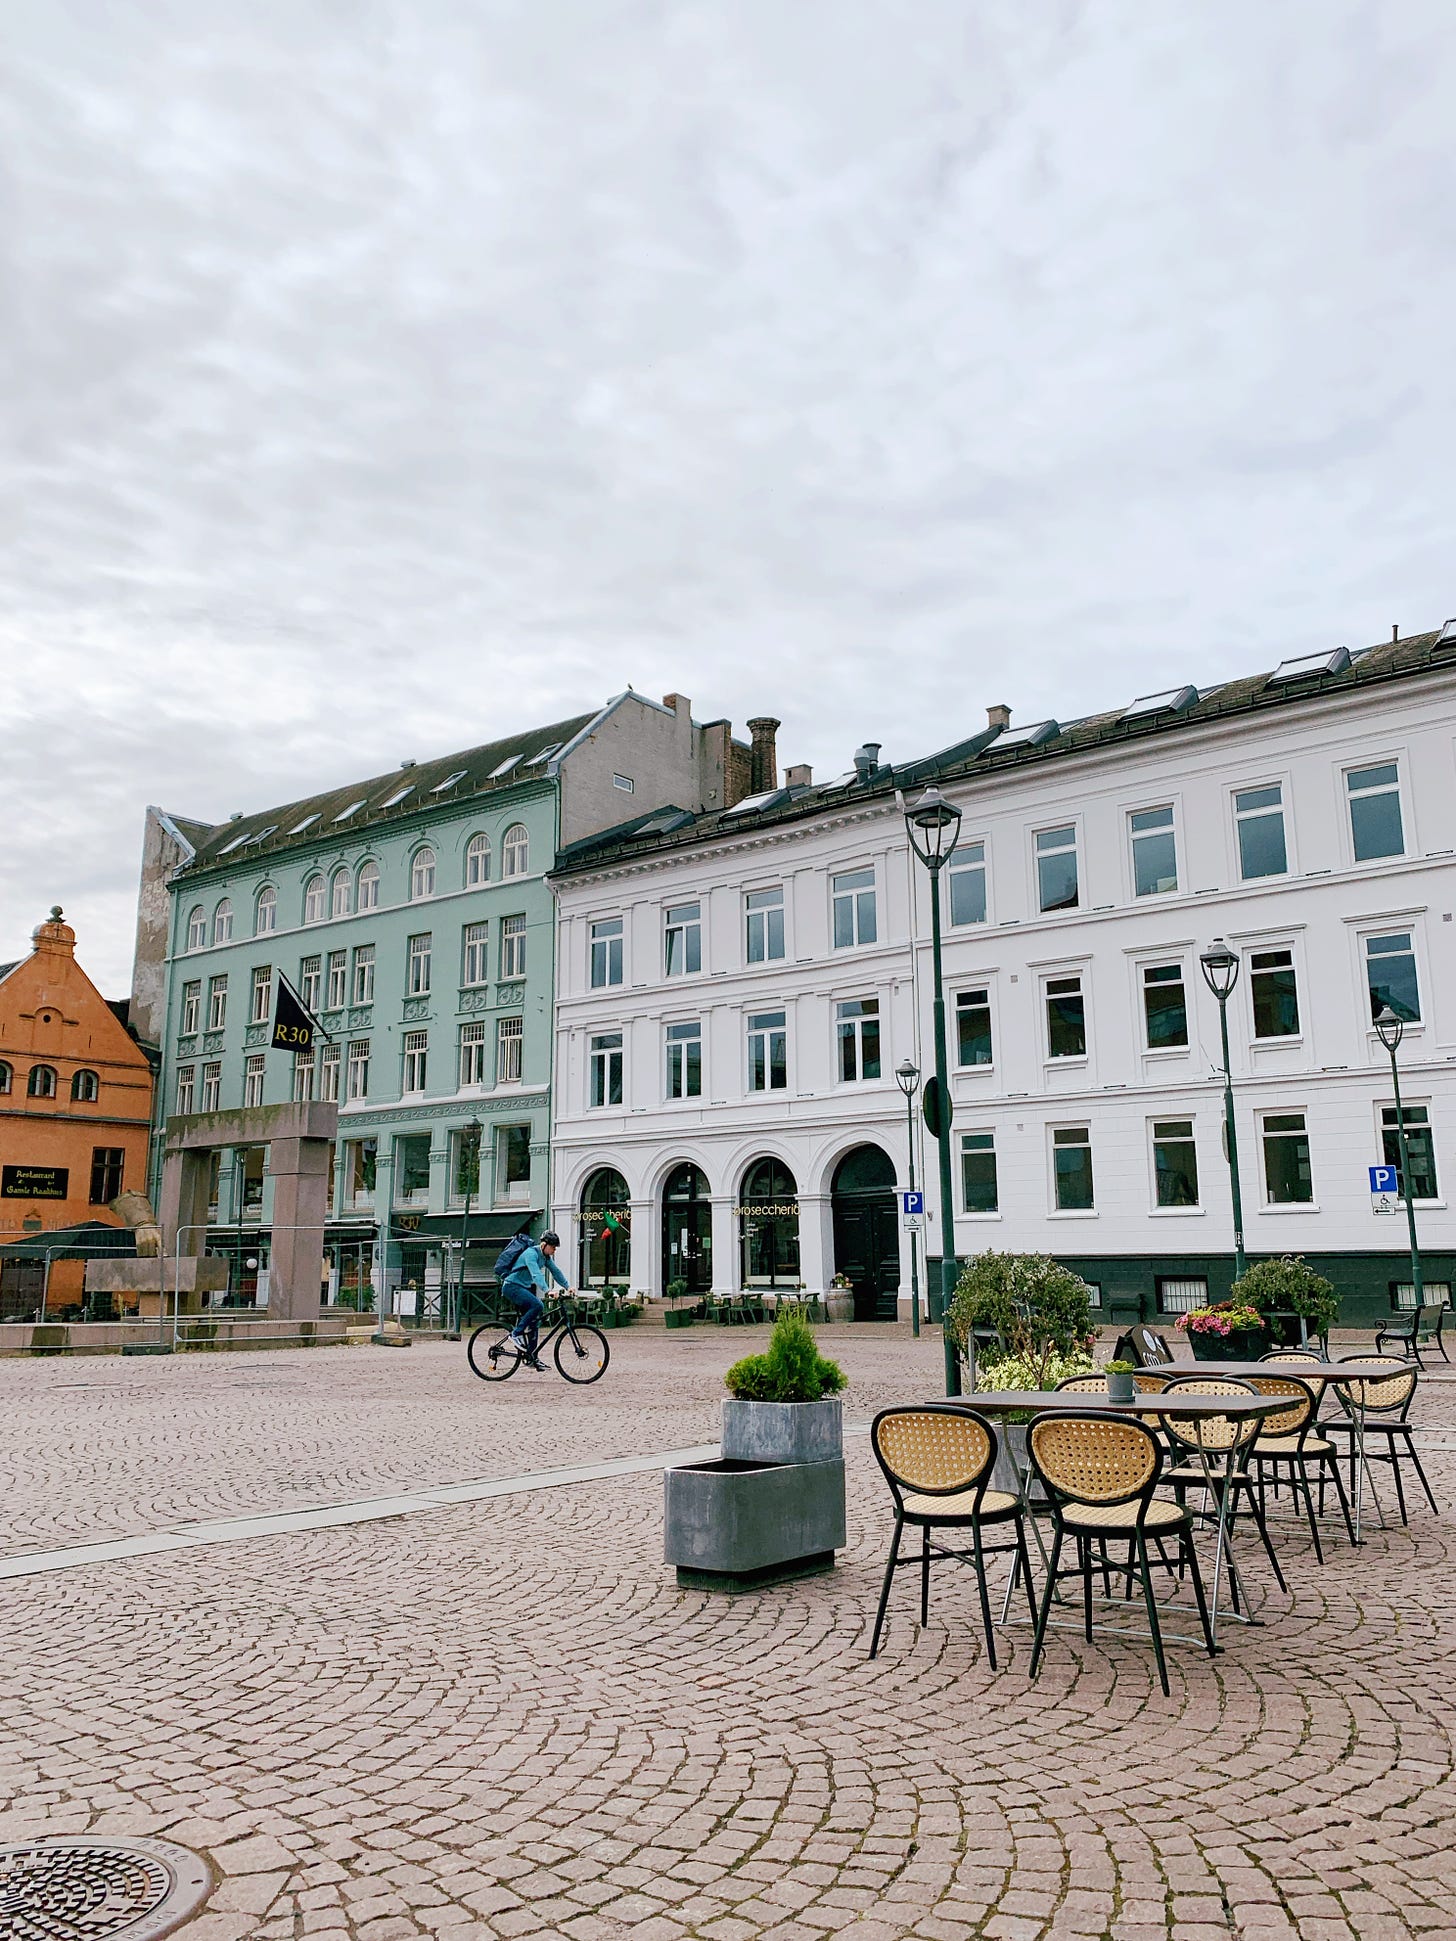 Pedestrian square in center of the city